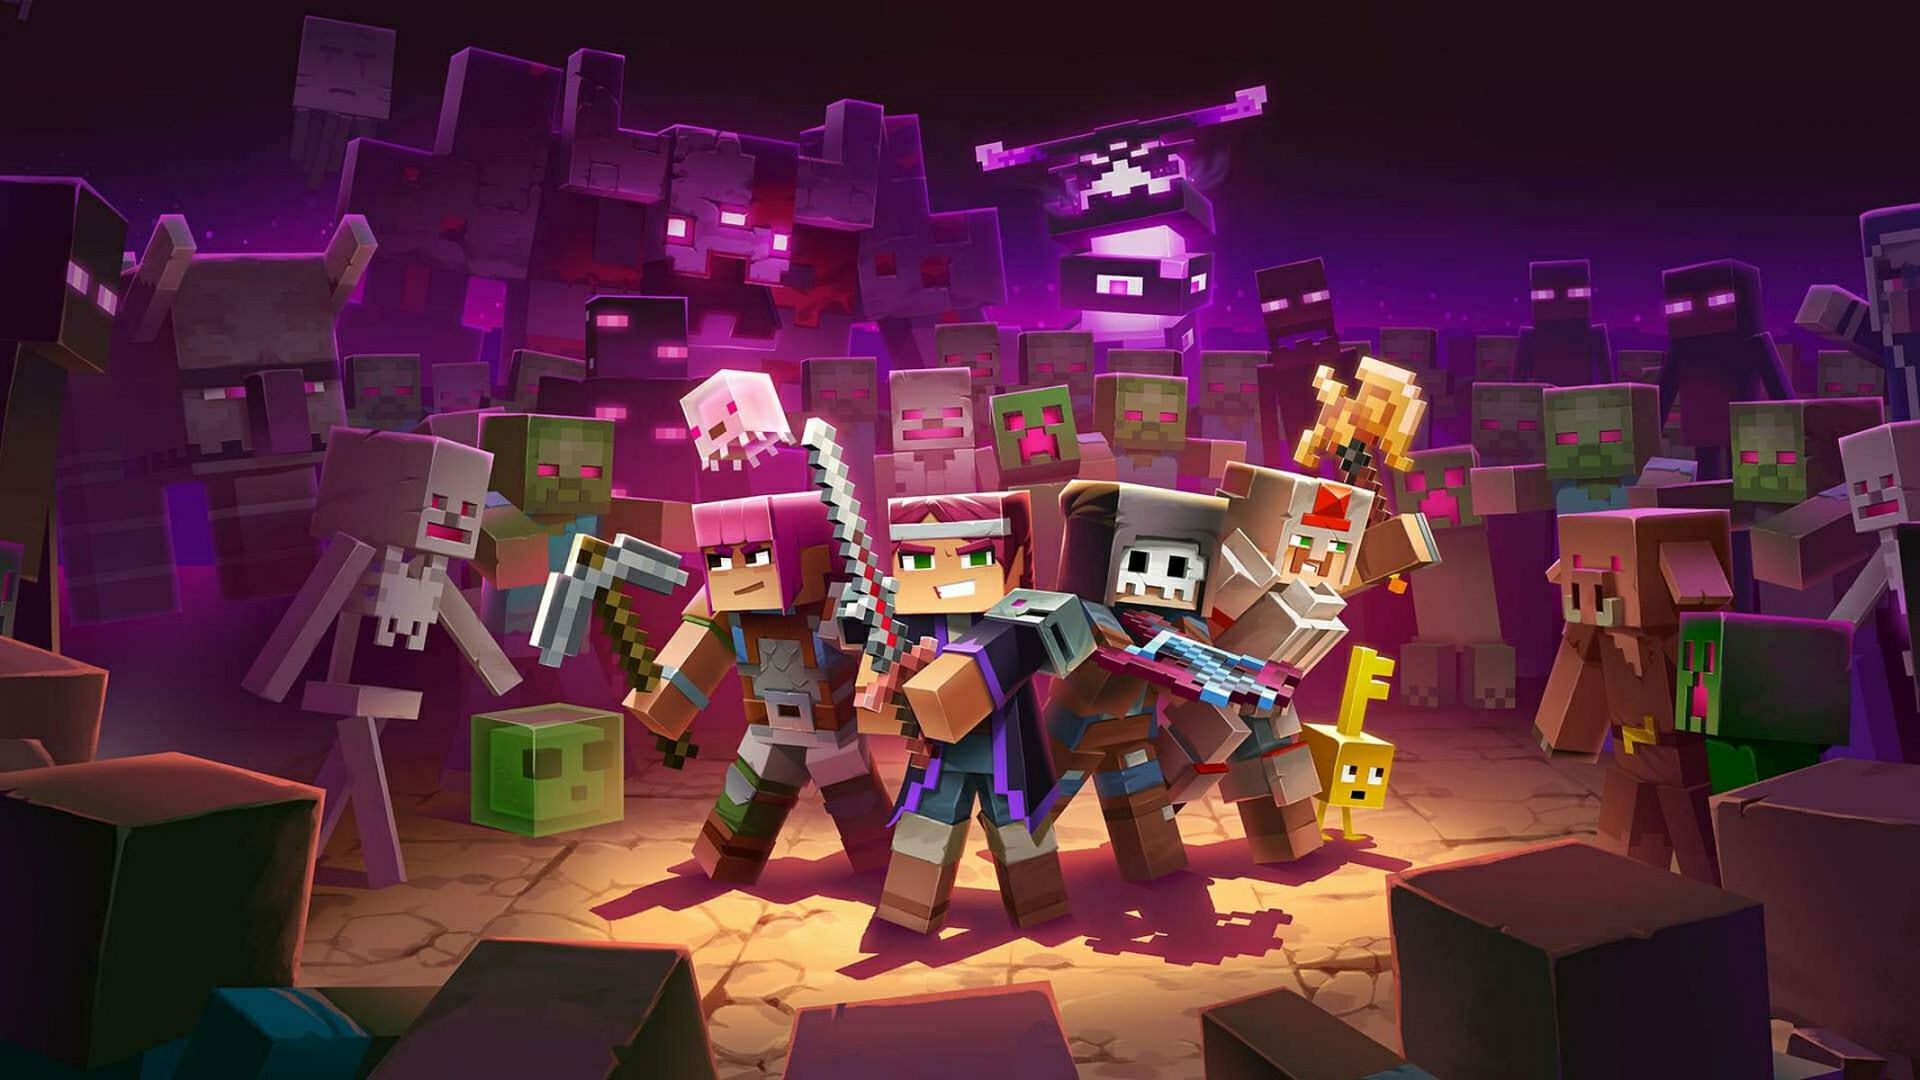 Minecraft Dungeons is the low-stress family hackathon we need